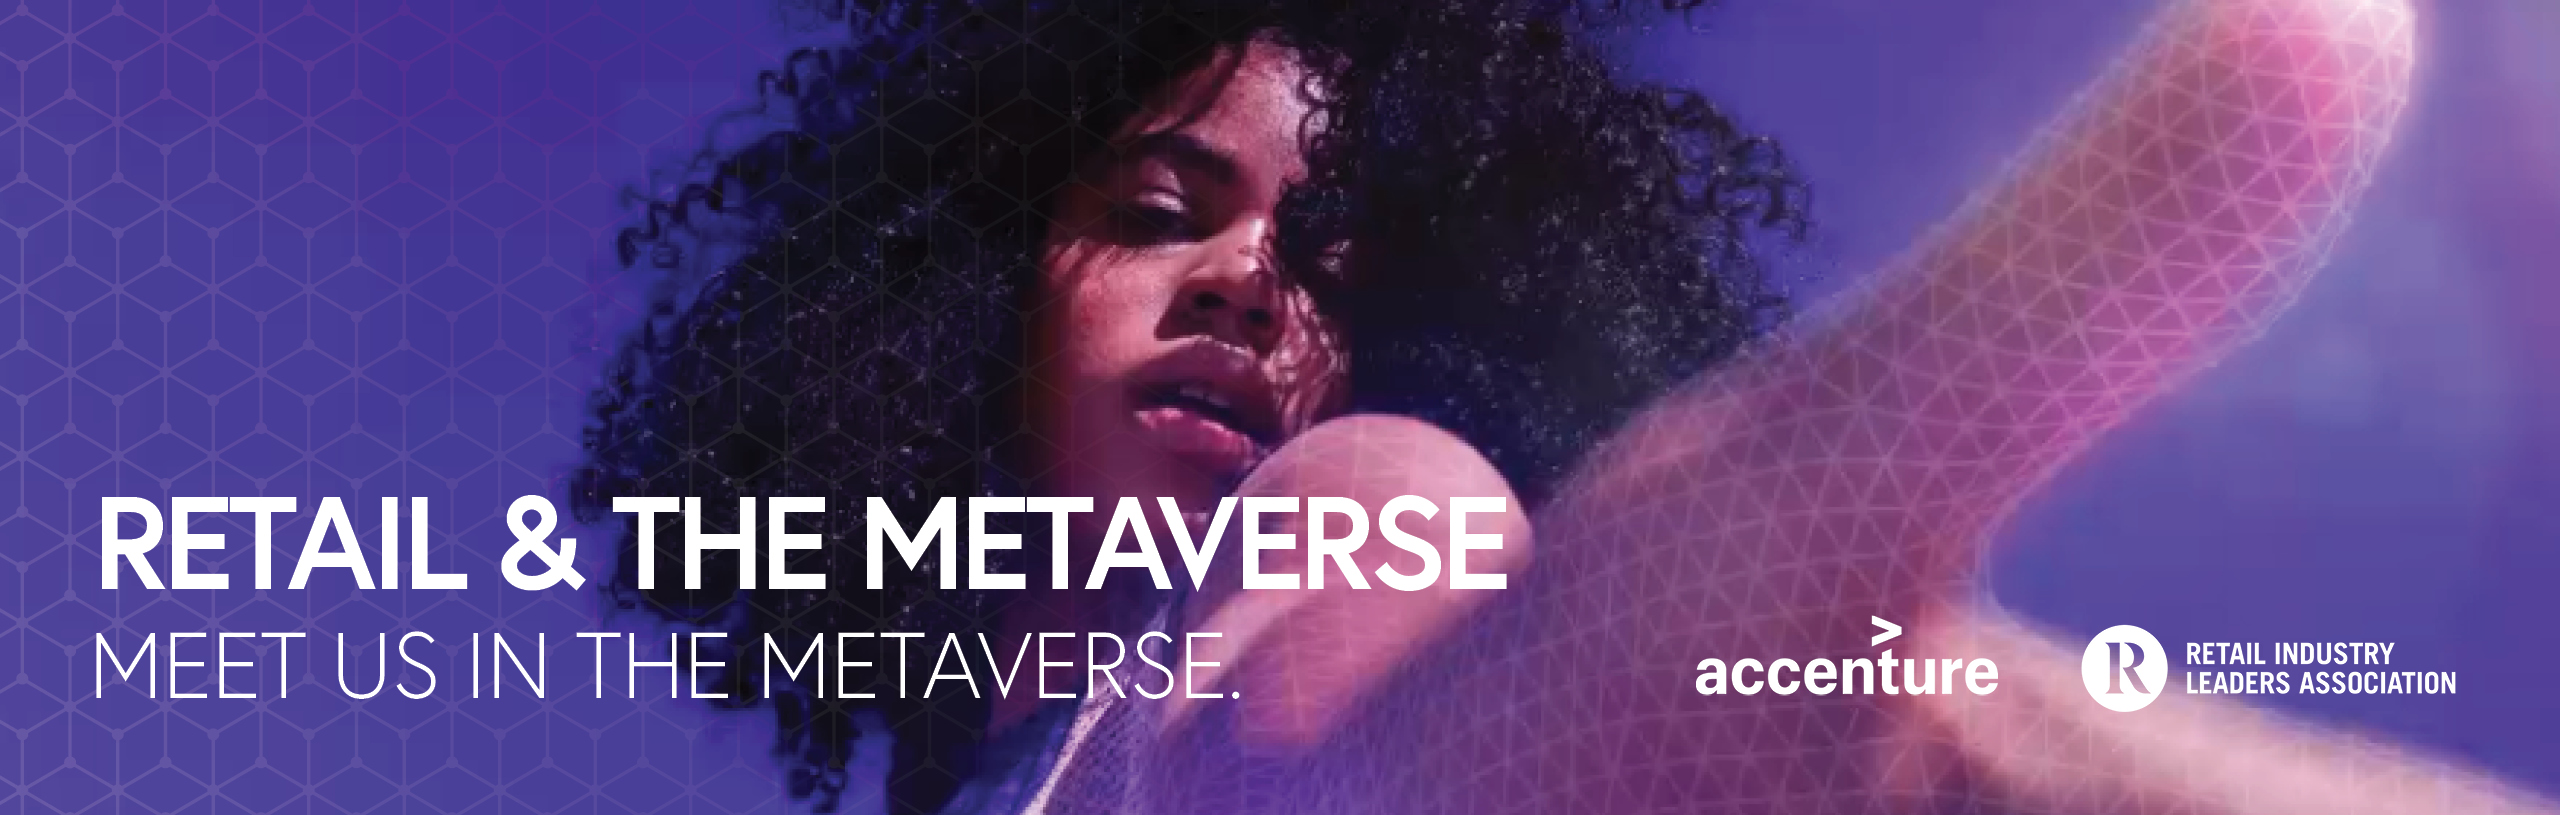 Retail and the metaverse. Meet us in the metaverse.